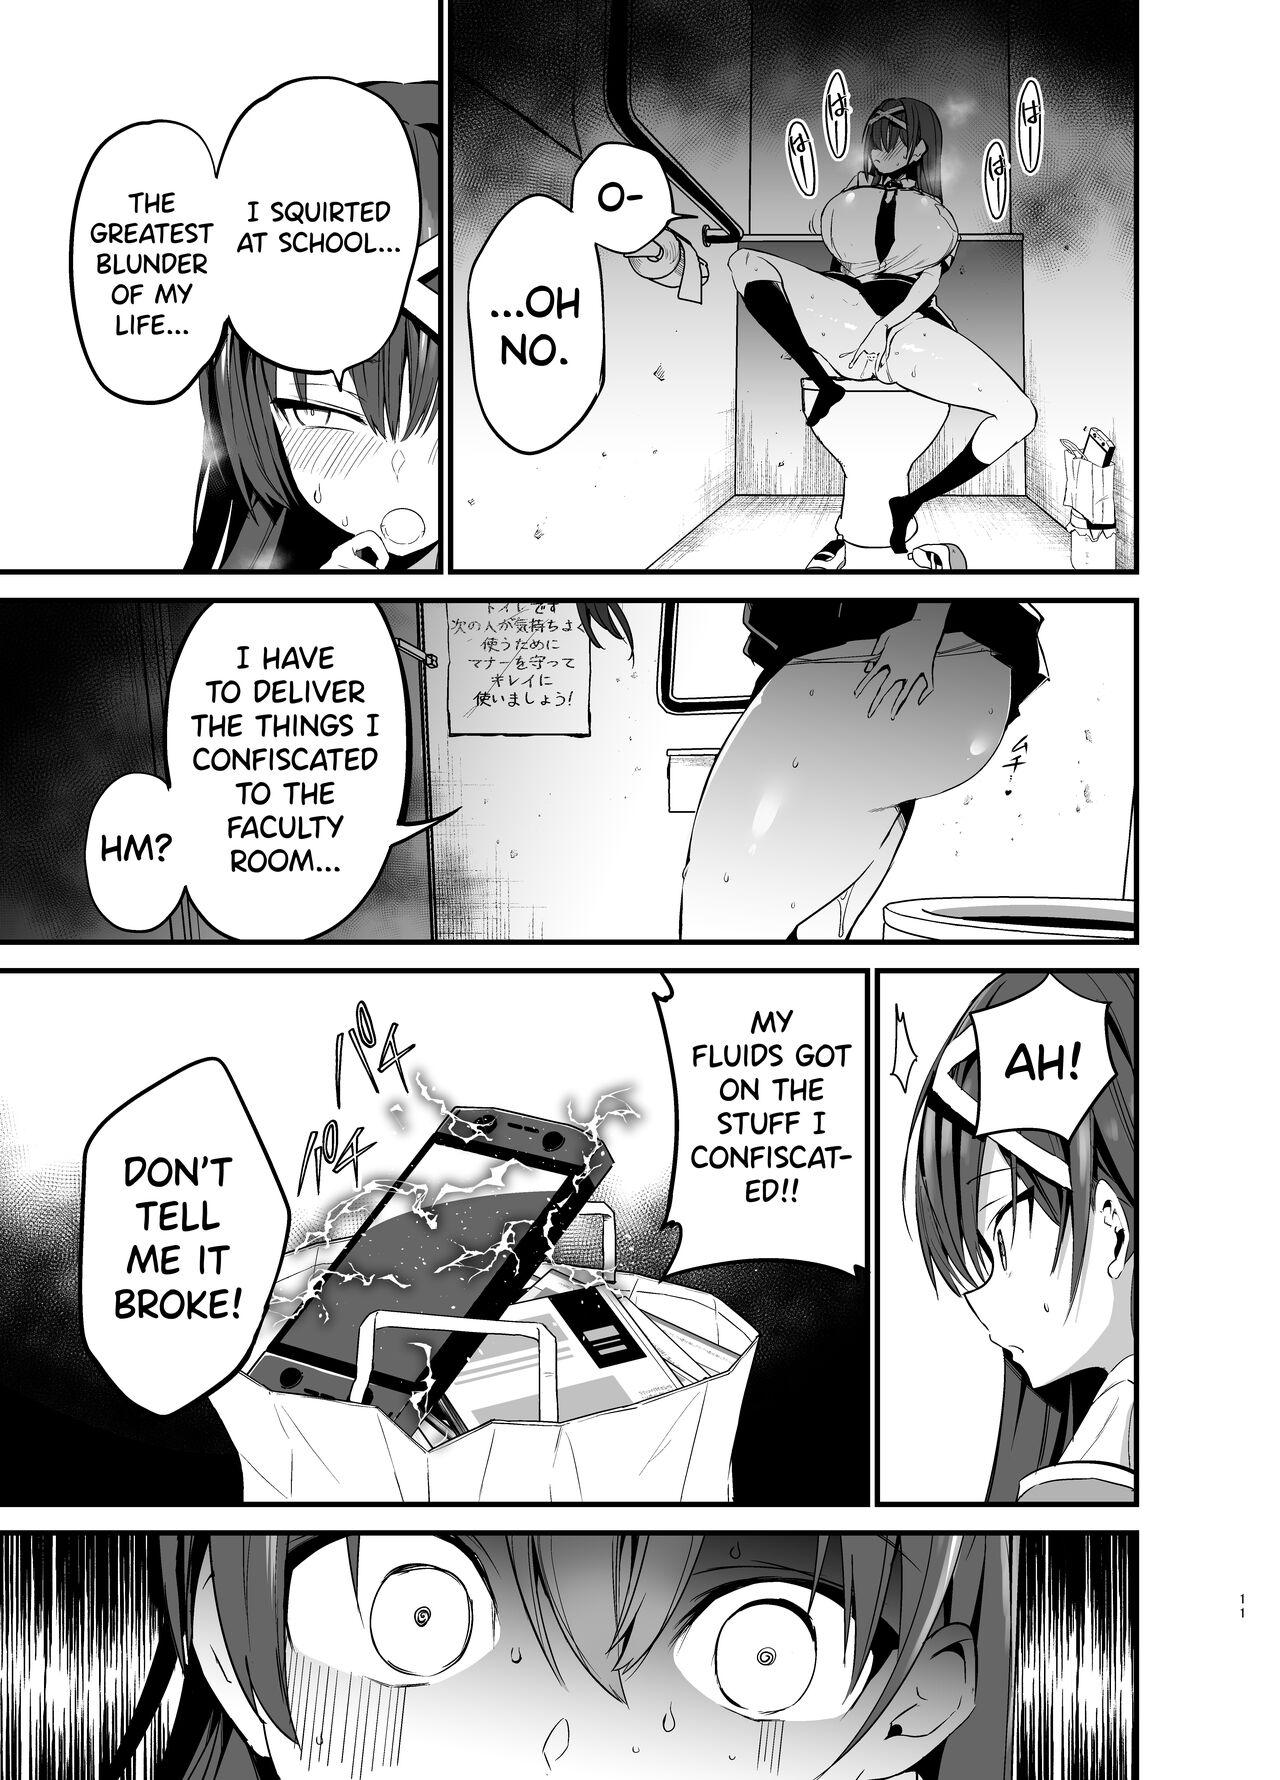 Pay Fuuki Iinchou ga Ochiru made | The Fall of the Morals Committee Persident - Original Audition - Page 10